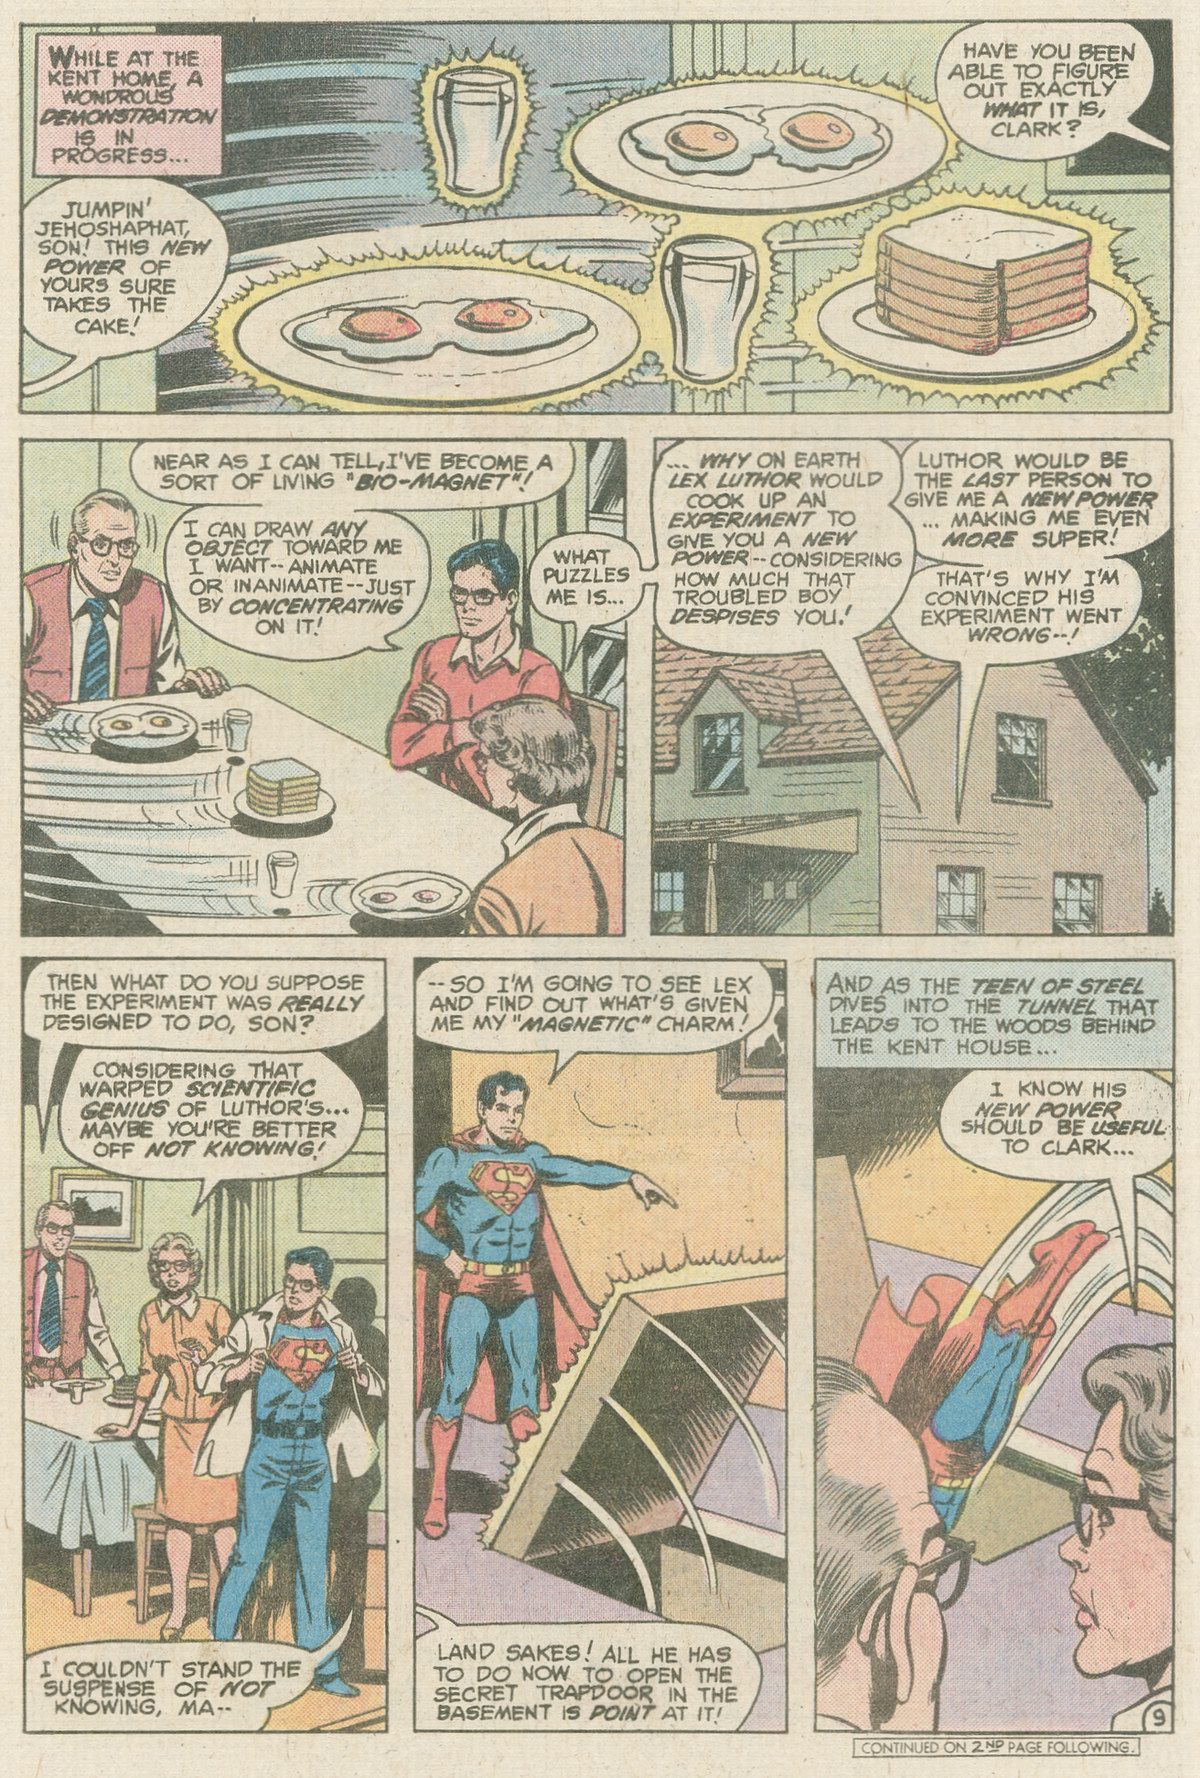 The New Adventures of Superboy 11 Page 9